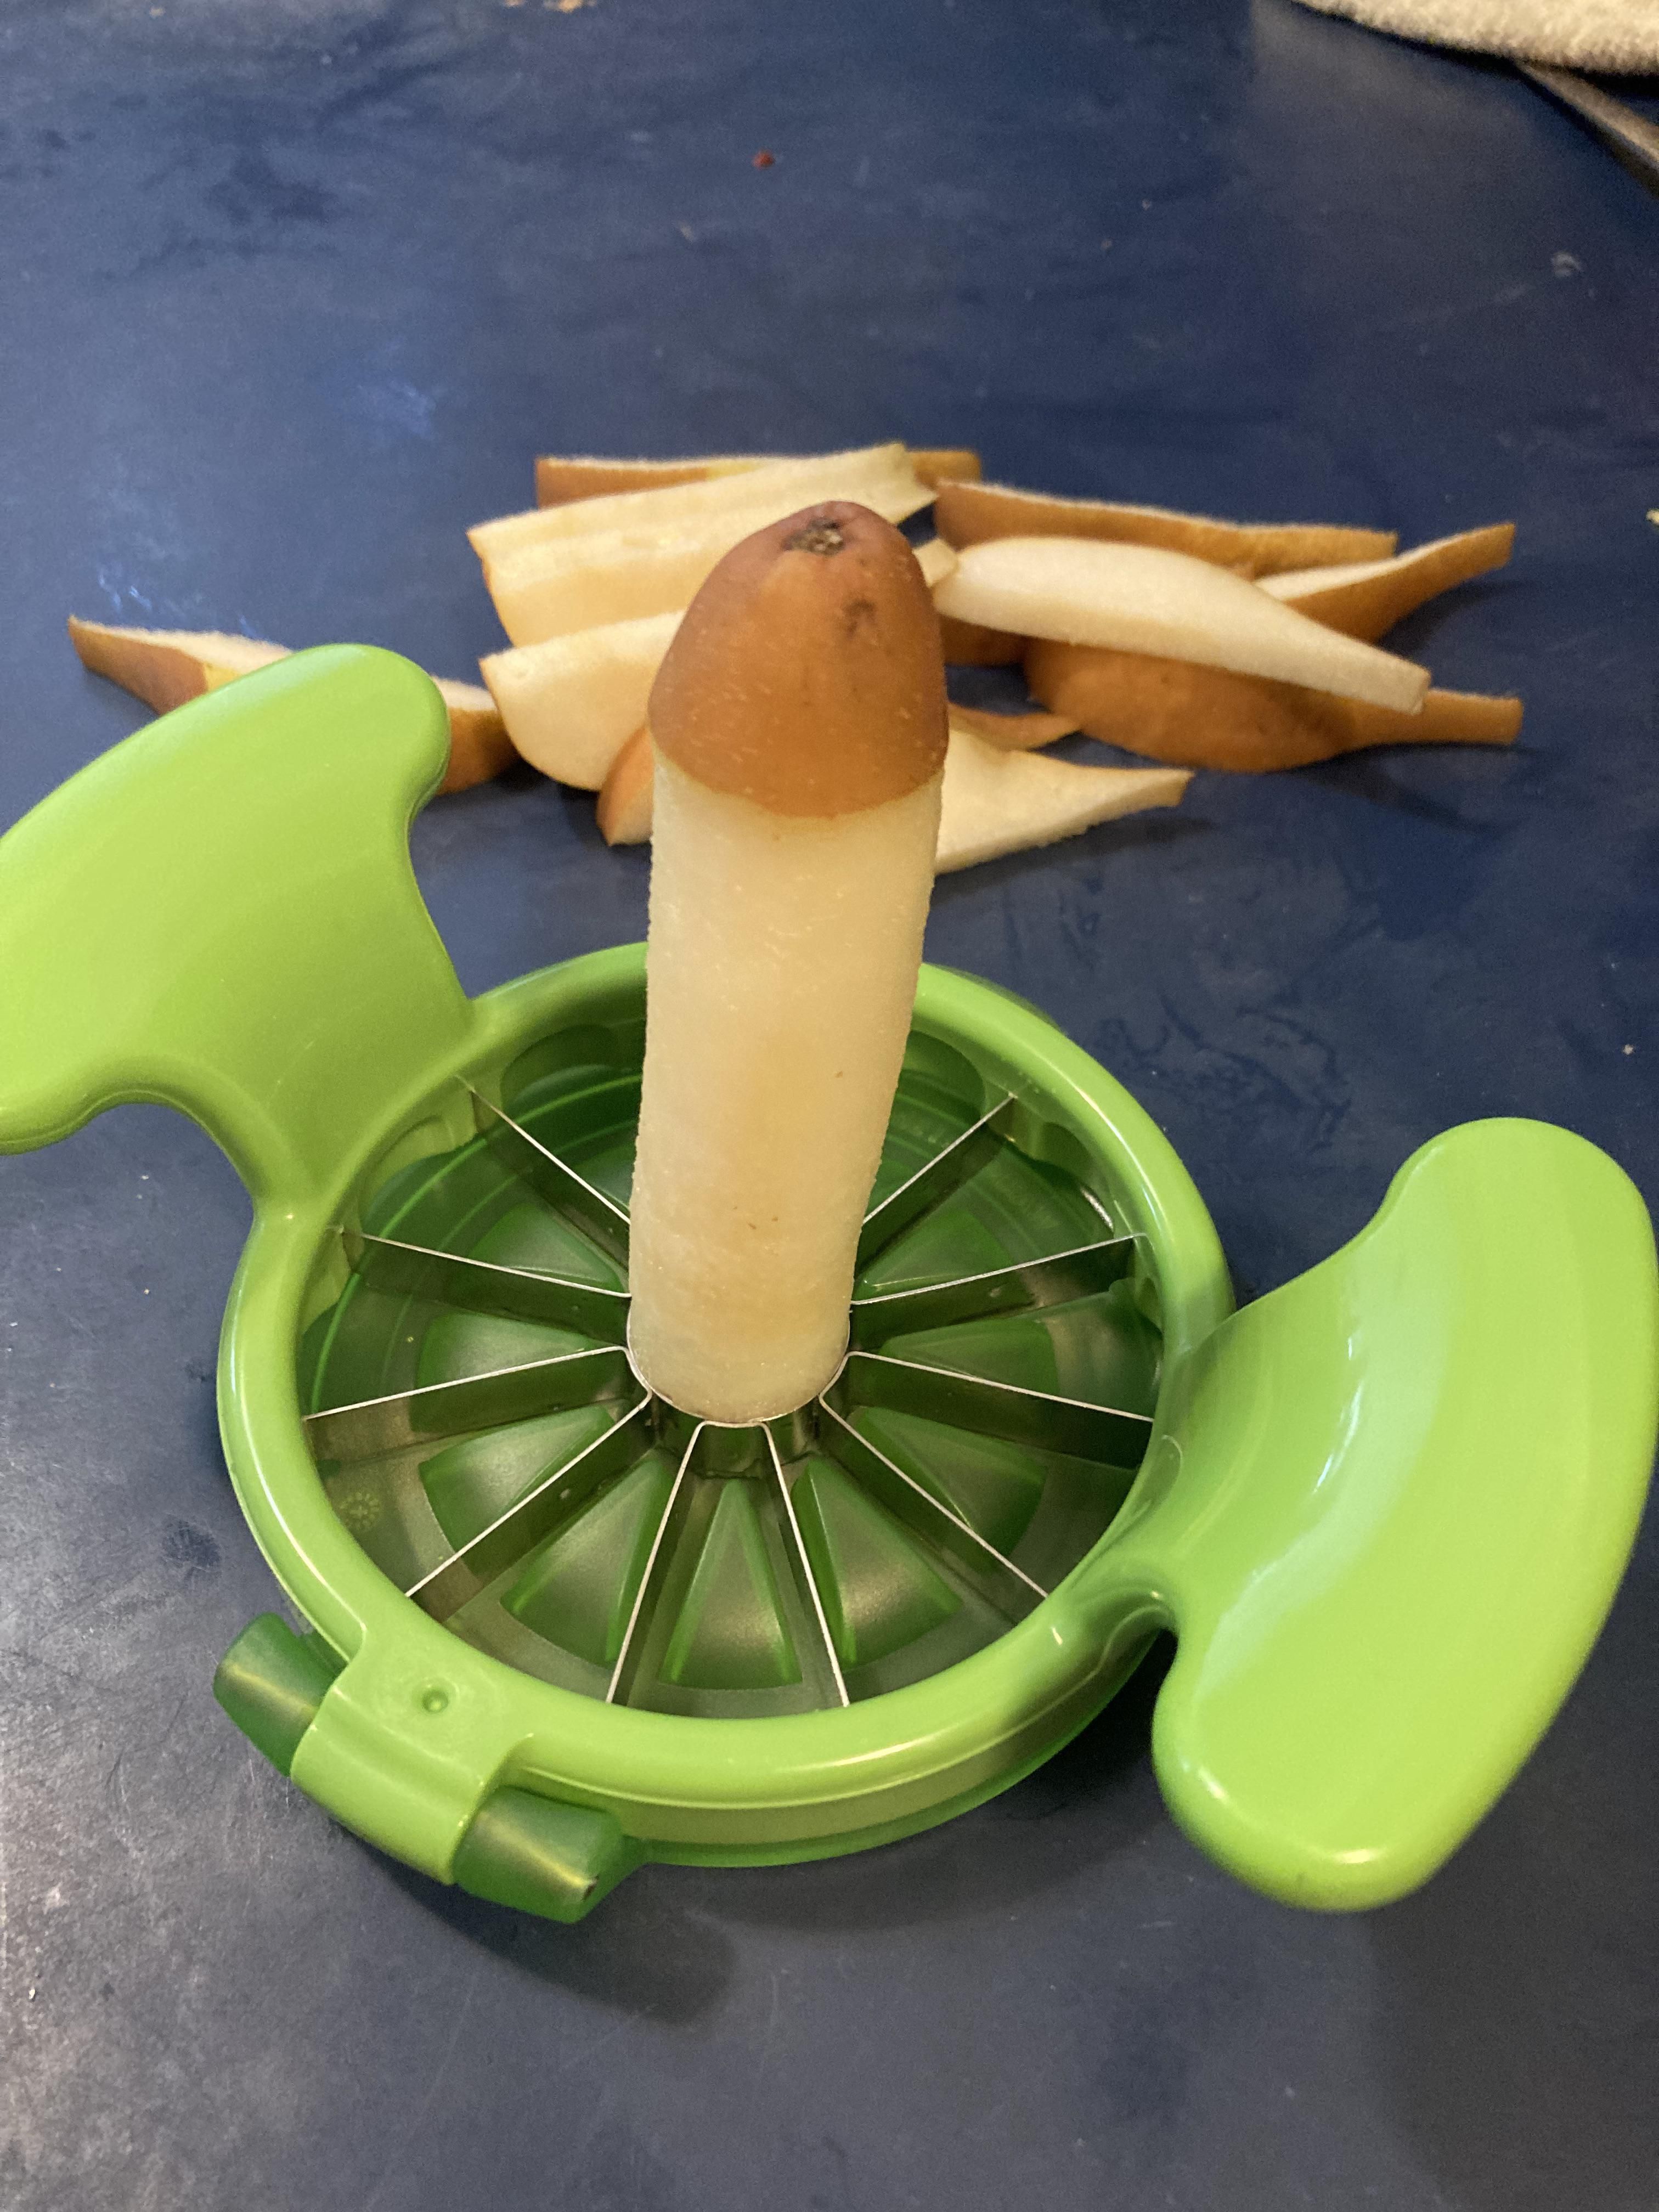 Used an Apple Slicer to Slice a Pear for Breakfast…